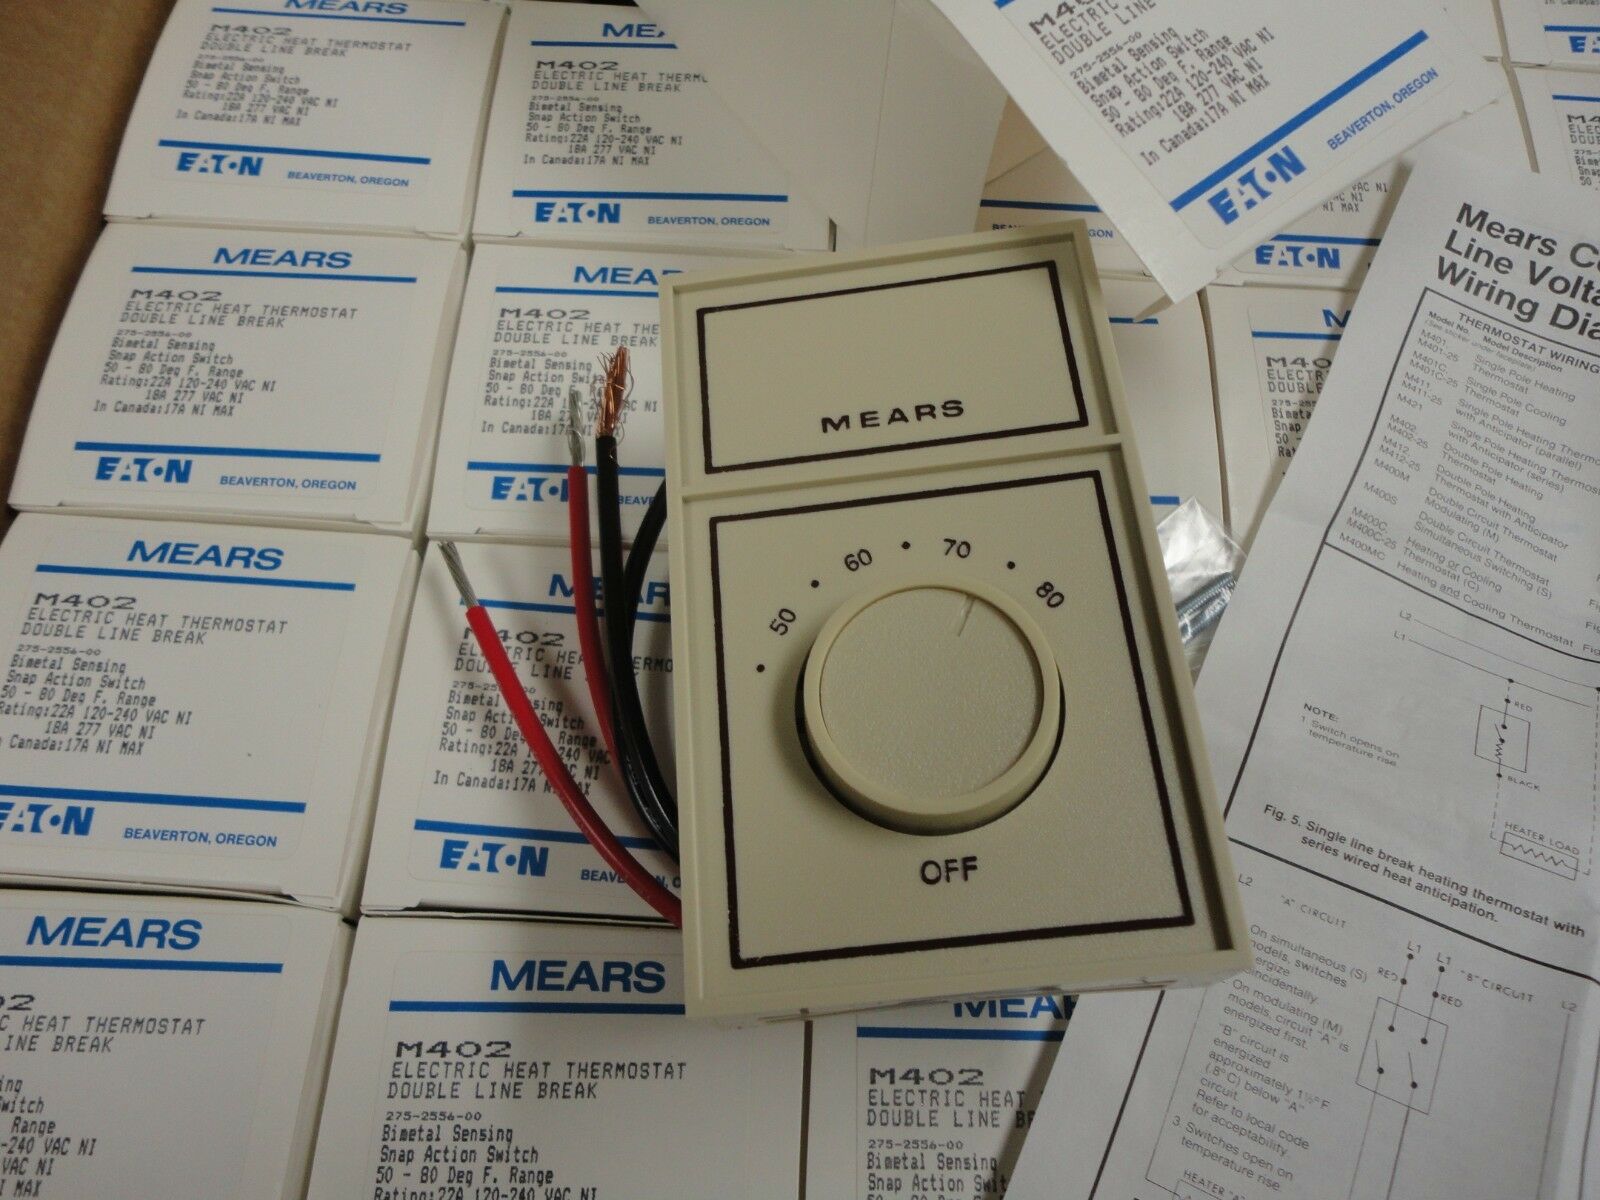 Mears # M402 Electric Heating Thermostat Double Line Break 22 Amp 120/240 Vac